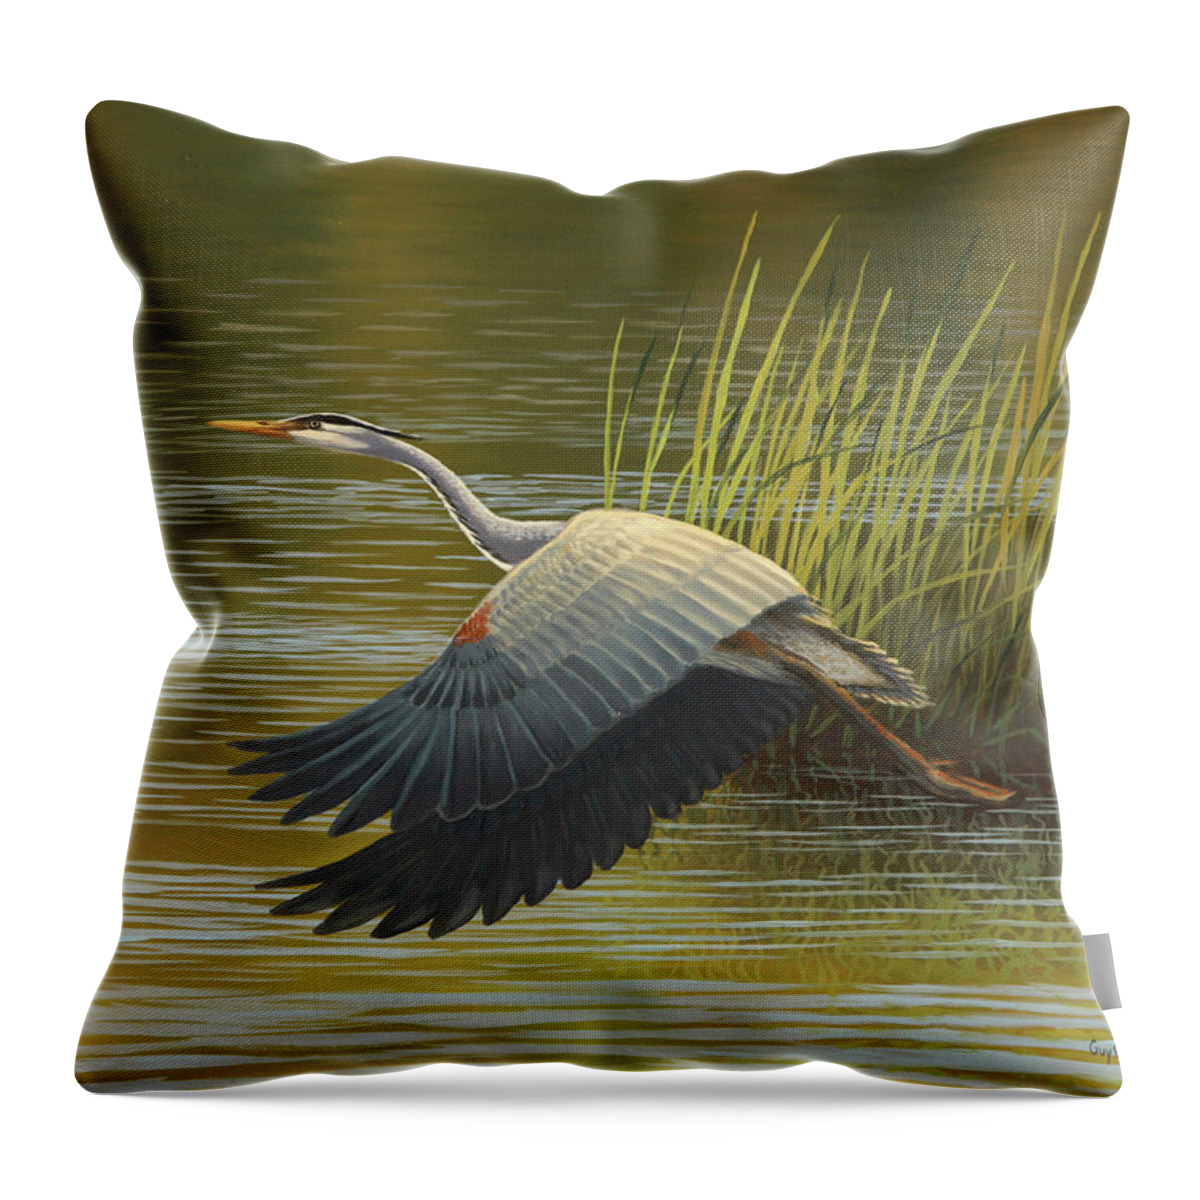 Heron Throw Pillow featuring the painting Heron Creek by Guy Crittenden